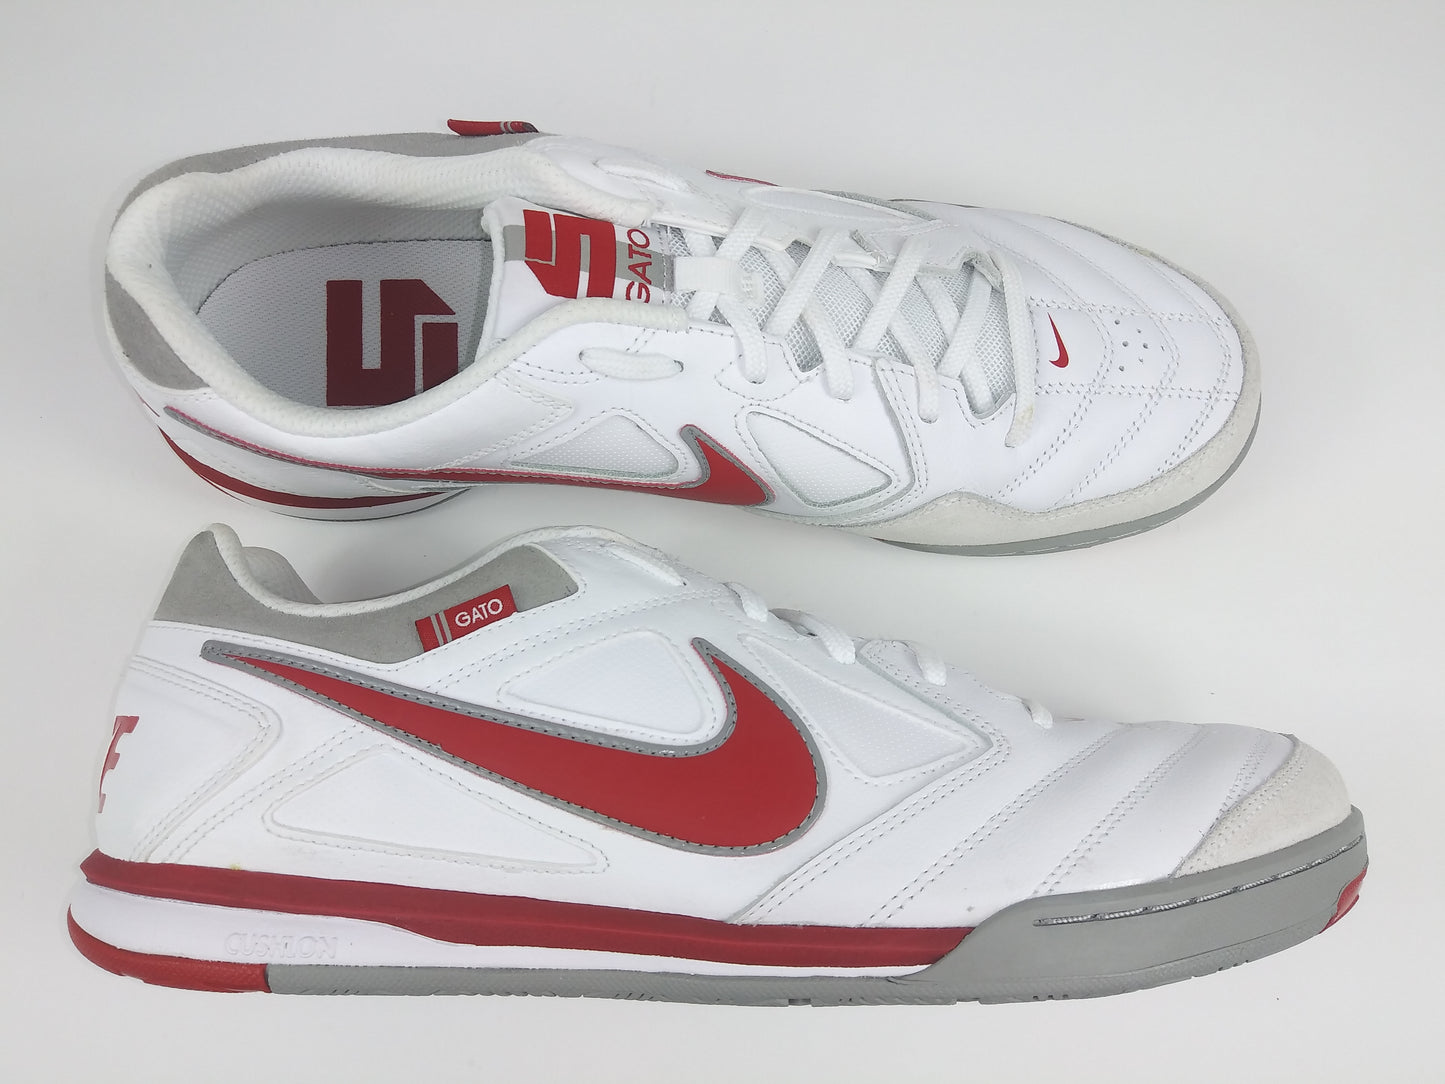 Nike Nike5 Gato LTR Indoor Shoes White Red